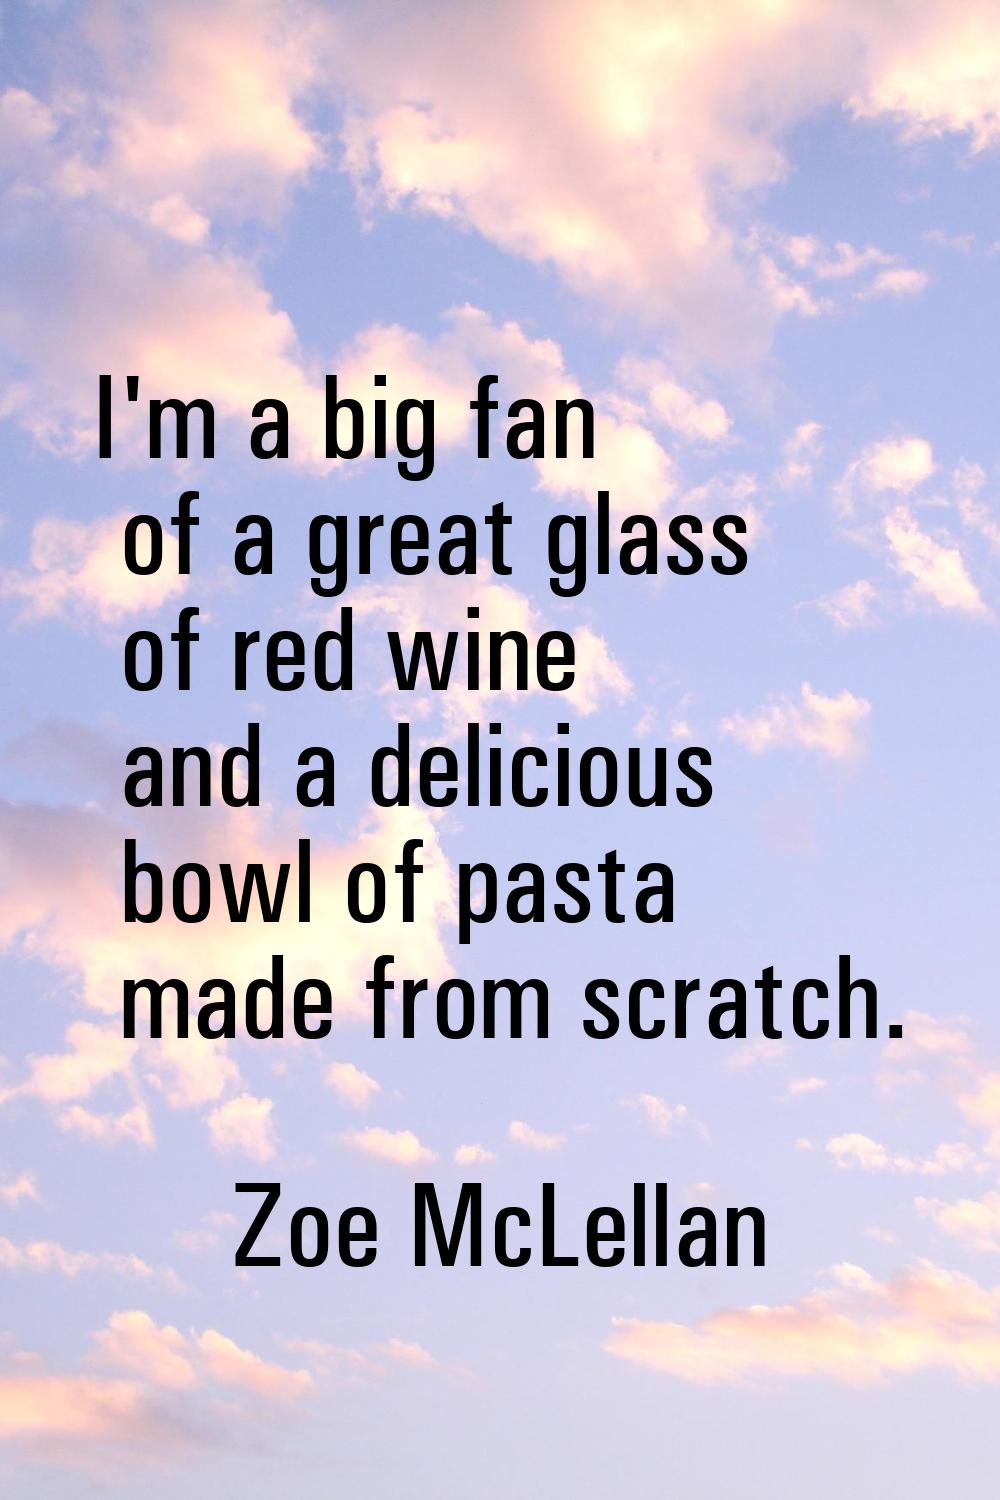 I'm a big fan of a great glass of red wine and a delicious bowl of pasta made from scratch.